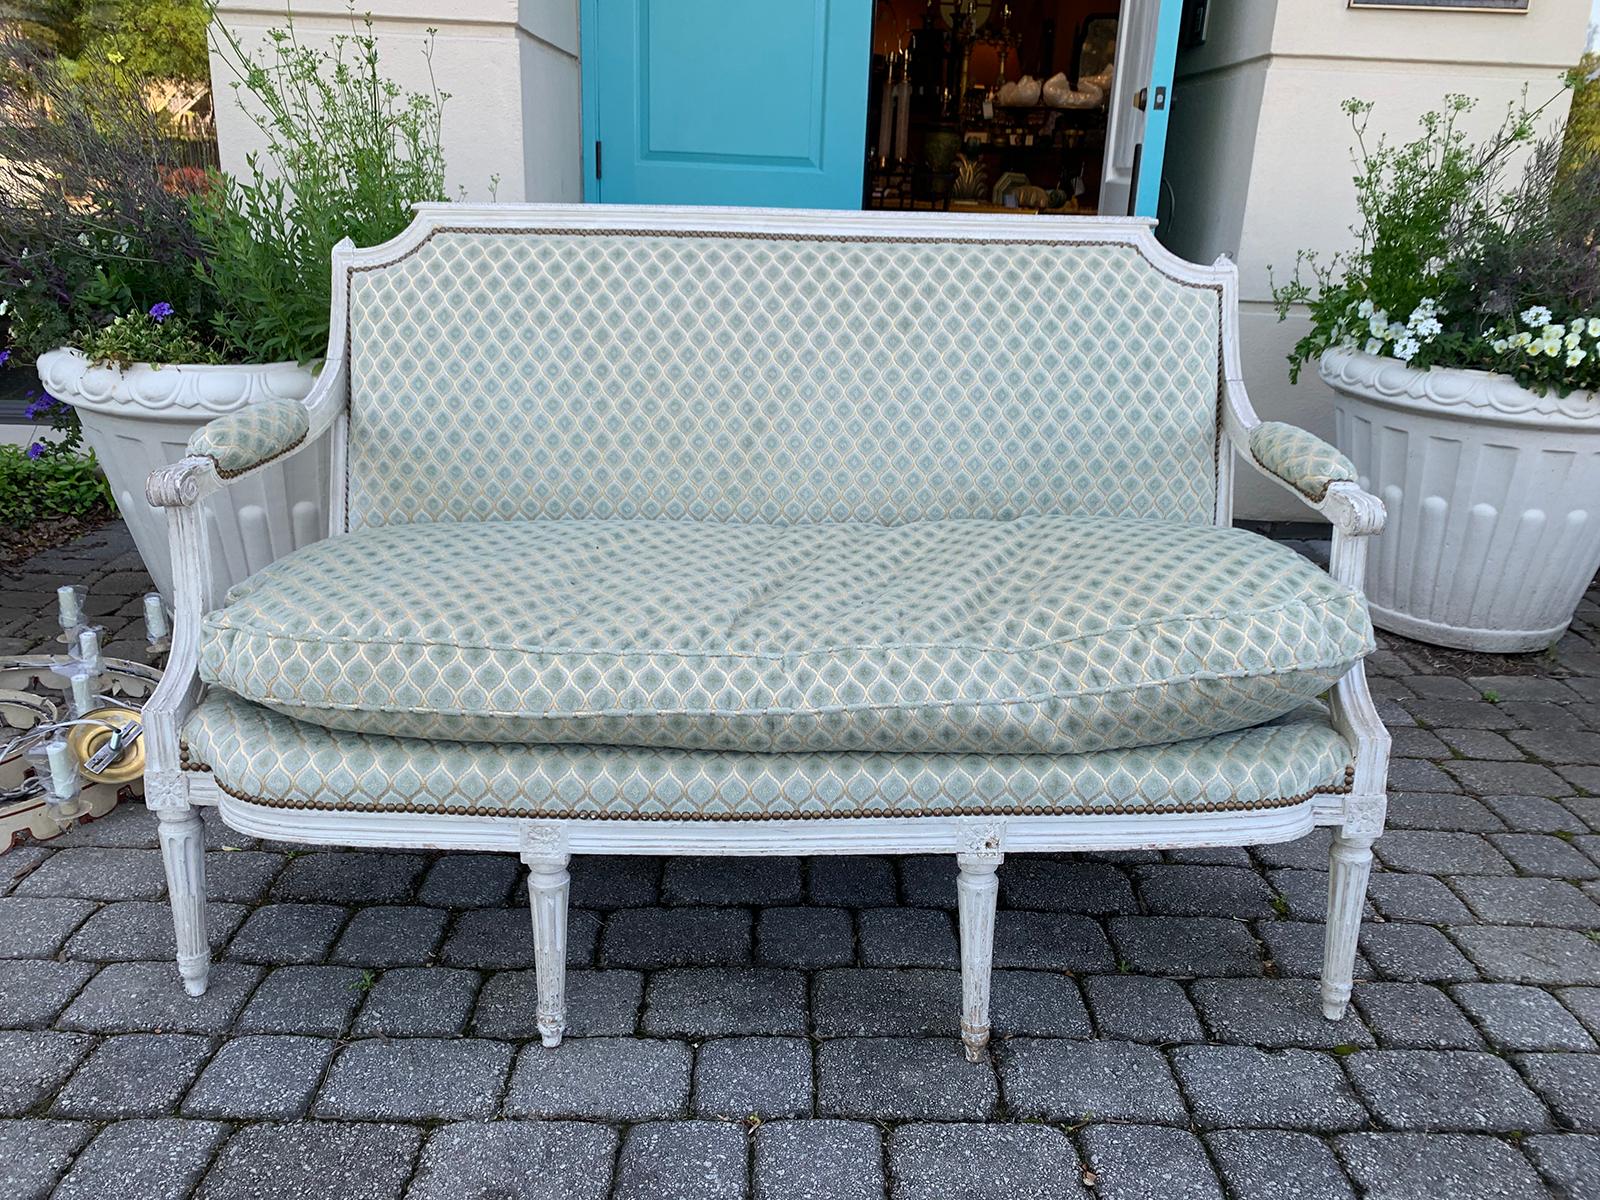 18th-19th century French Louis XVI style painted and upholstered settee
Very comfortable
Measures: 57